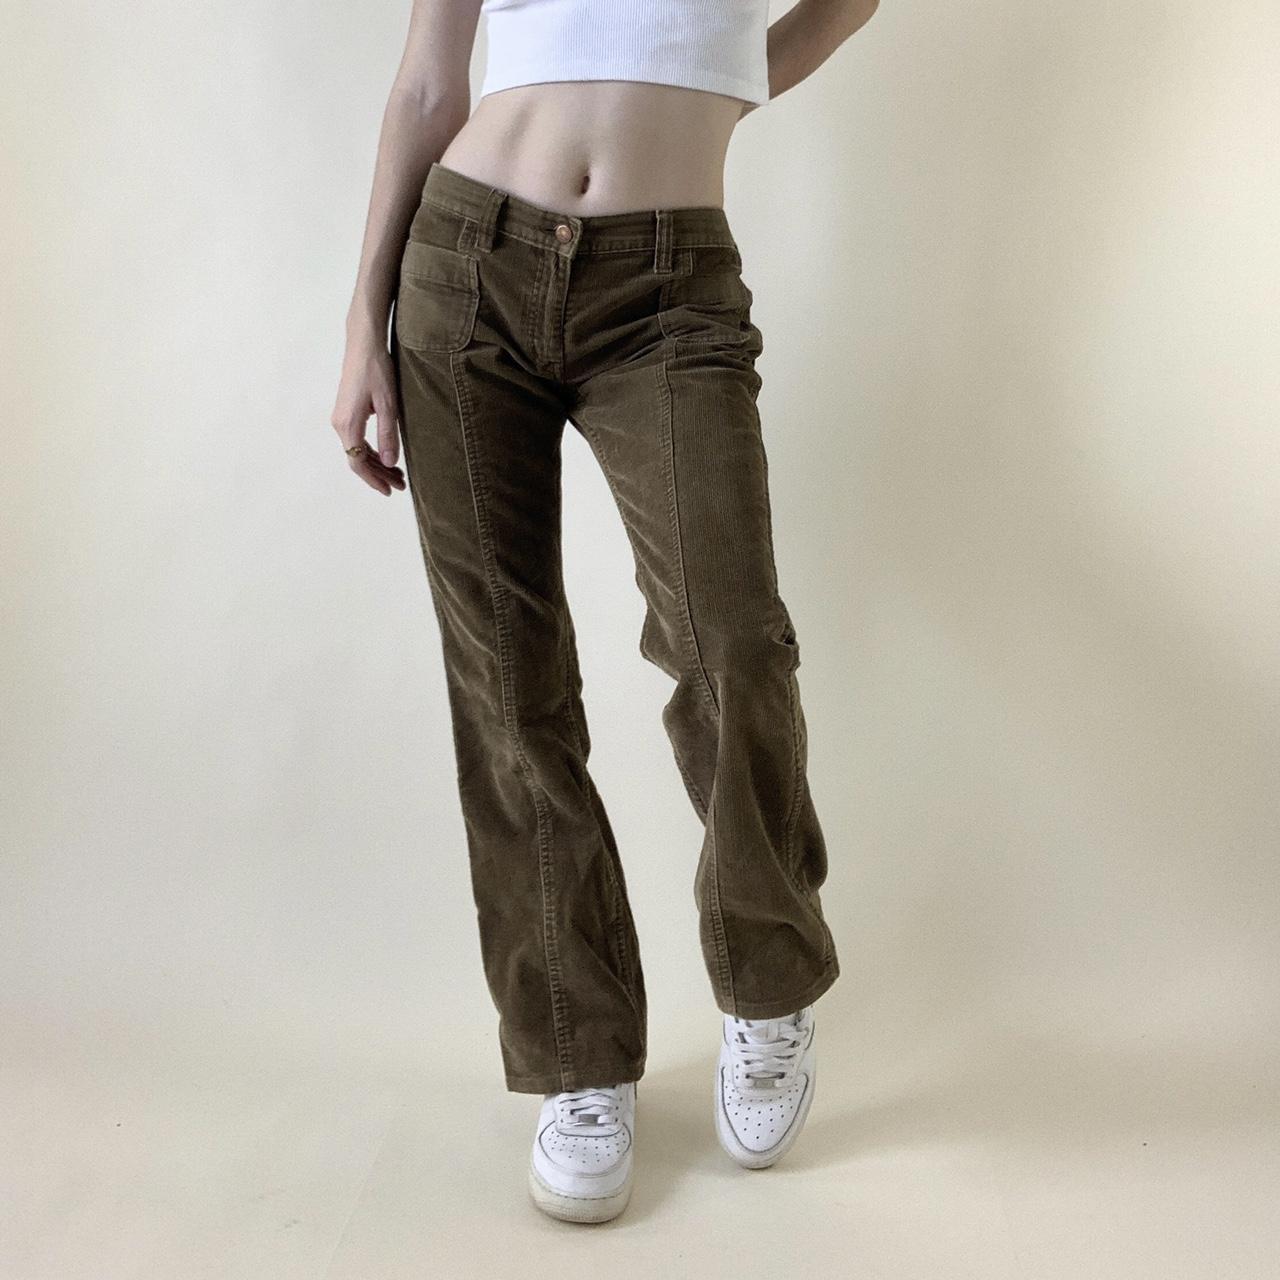 hysteric glamour brown corduroy jeans. Super cute,... - Depop